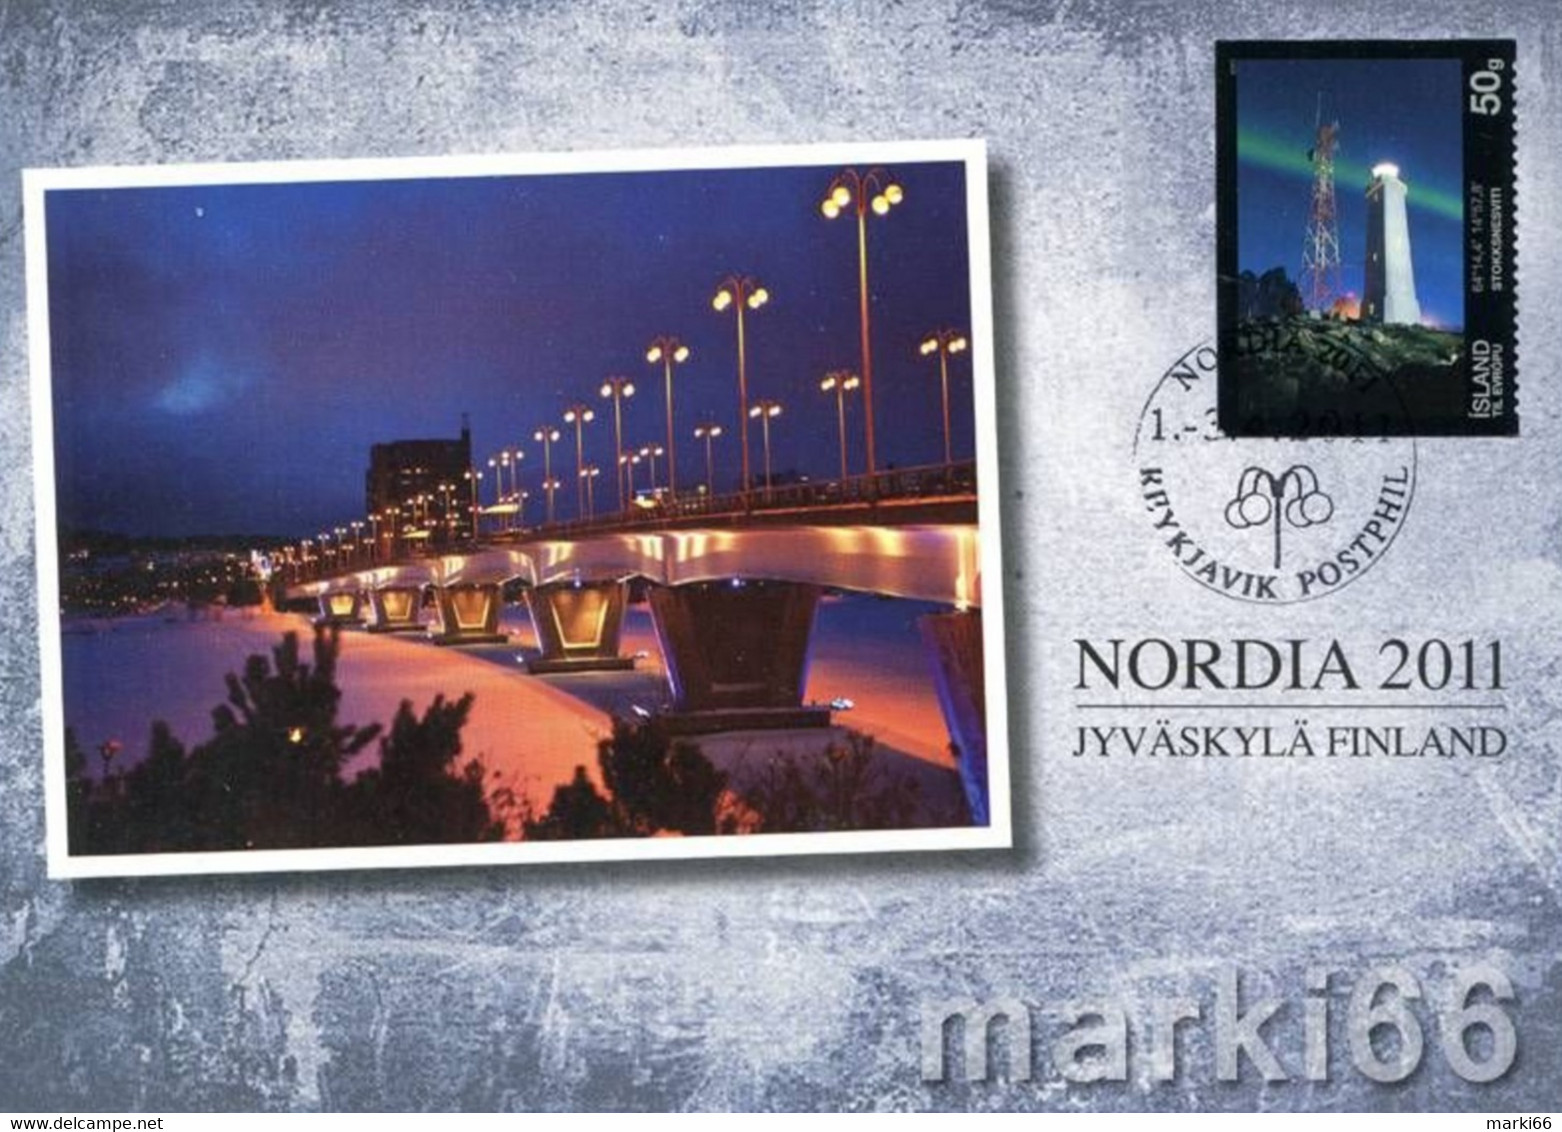 Iceland - 2011 - Exhibition Card - NORDIA 2011, Finland - Official Postcard With Stamp And Special Postmark - Cartes-maximum